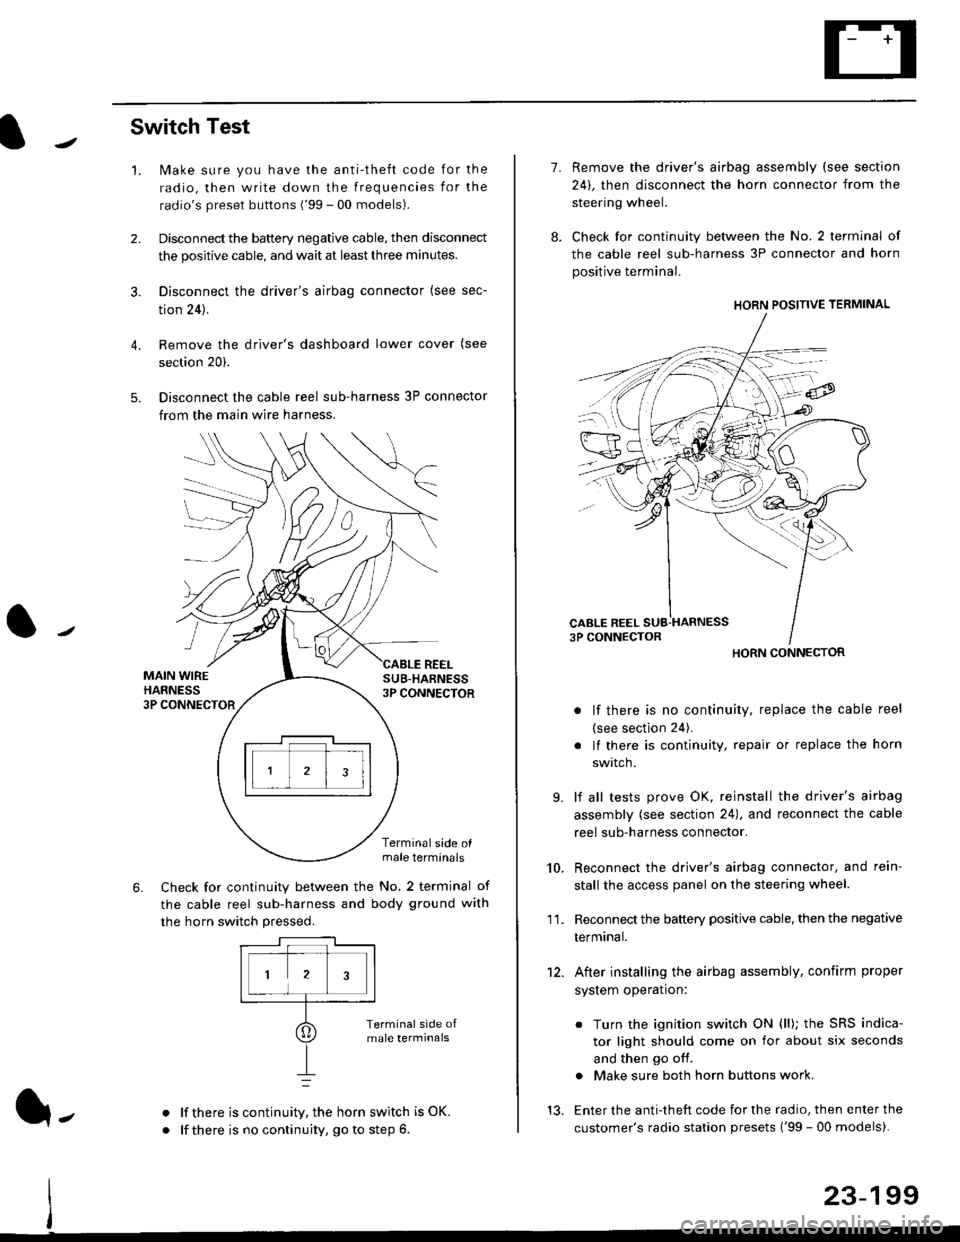 HONDA CIVIC 1996 6.G Workshop Manual Switch Test
lMake sure you have the anti-theft code for the
radio, then write down the frequencies for the
radios preset buttons (99 - 00 models).
Disconnect the battery negative cable, then disconn